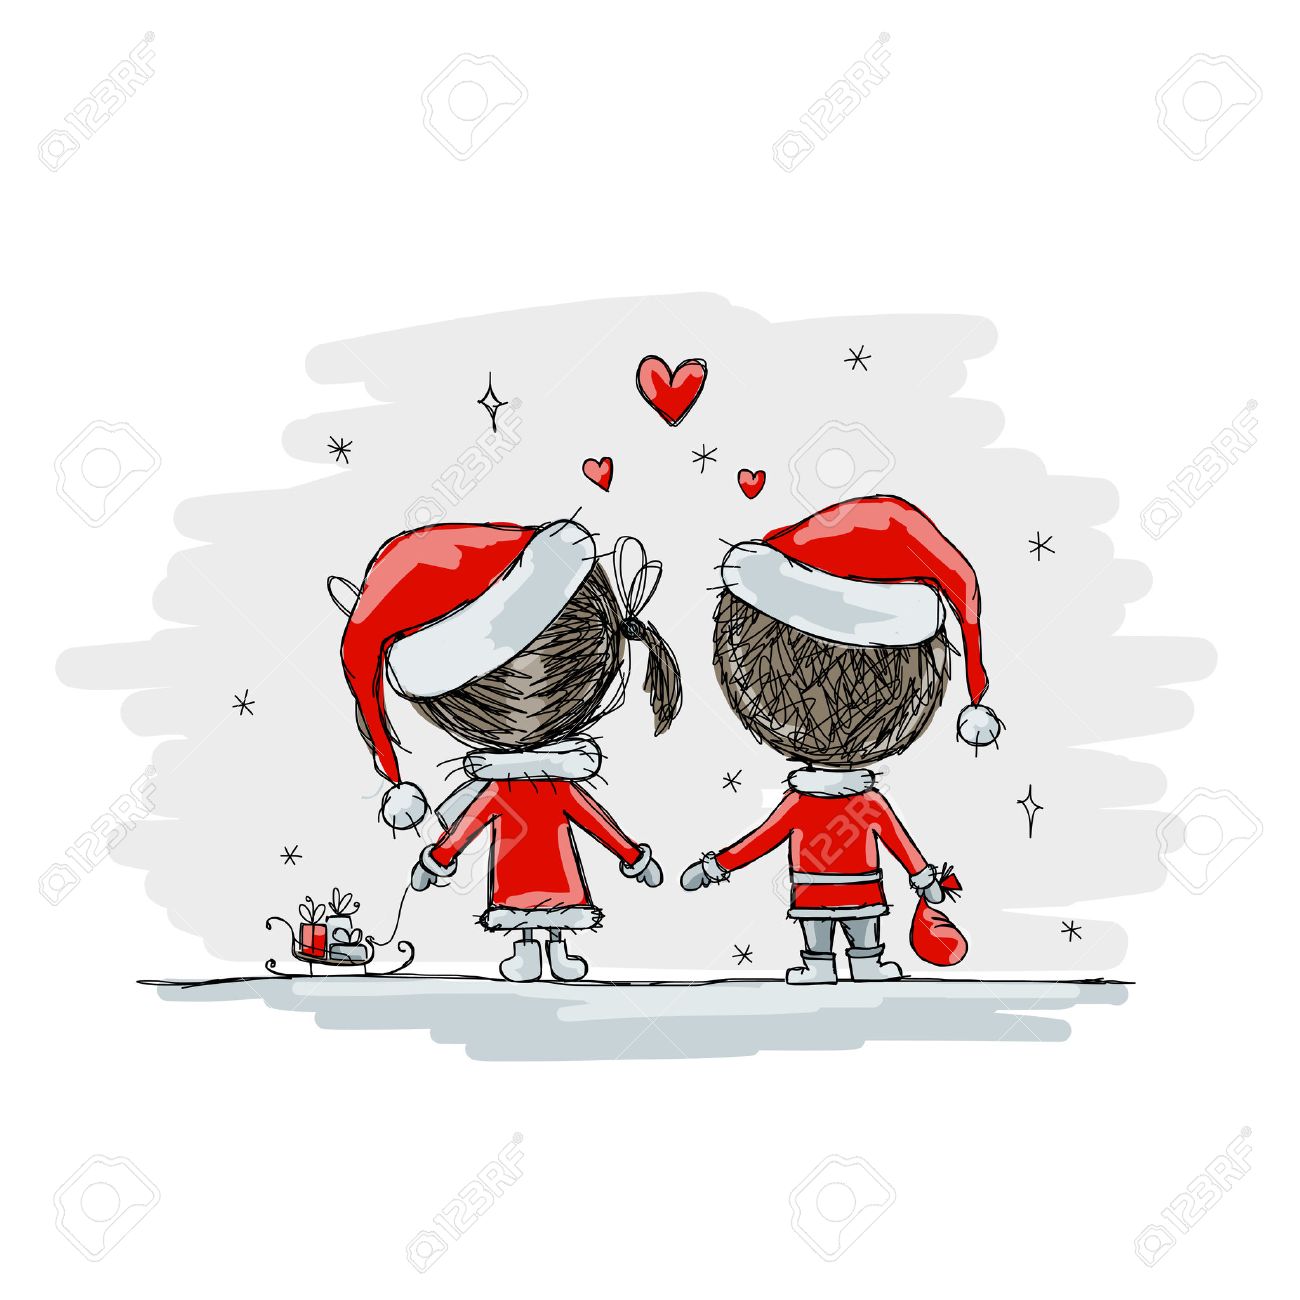 Couple in love together, christmas illustration for your design,...